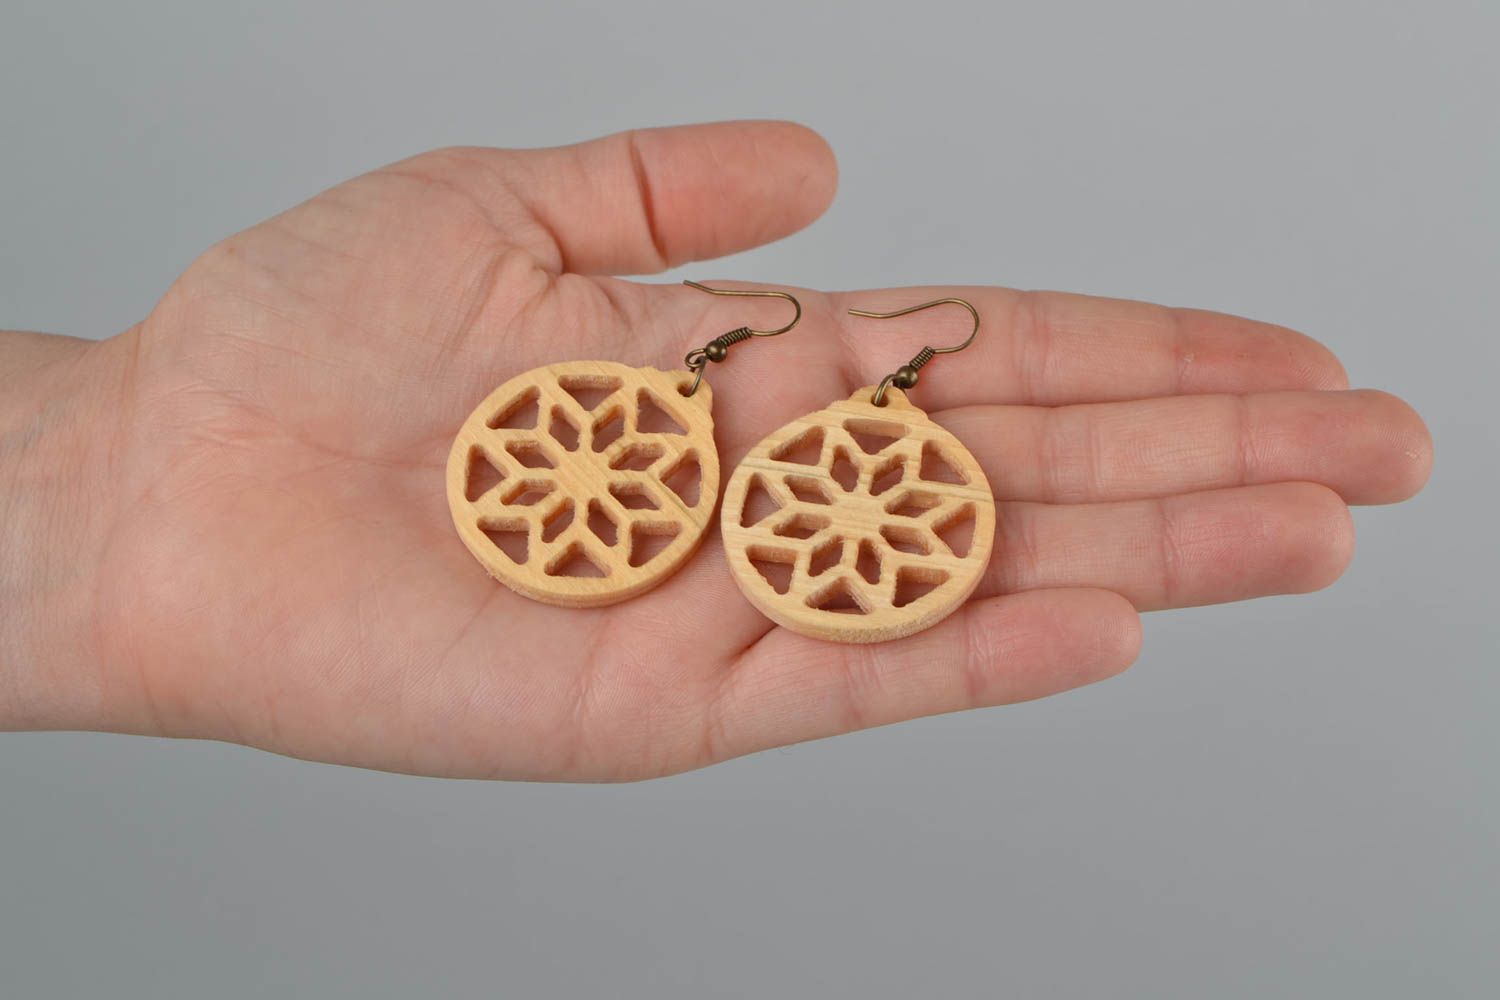 Slavic earrings with charms Alatyr symbol made of linden wood handmade jewelry photo 2